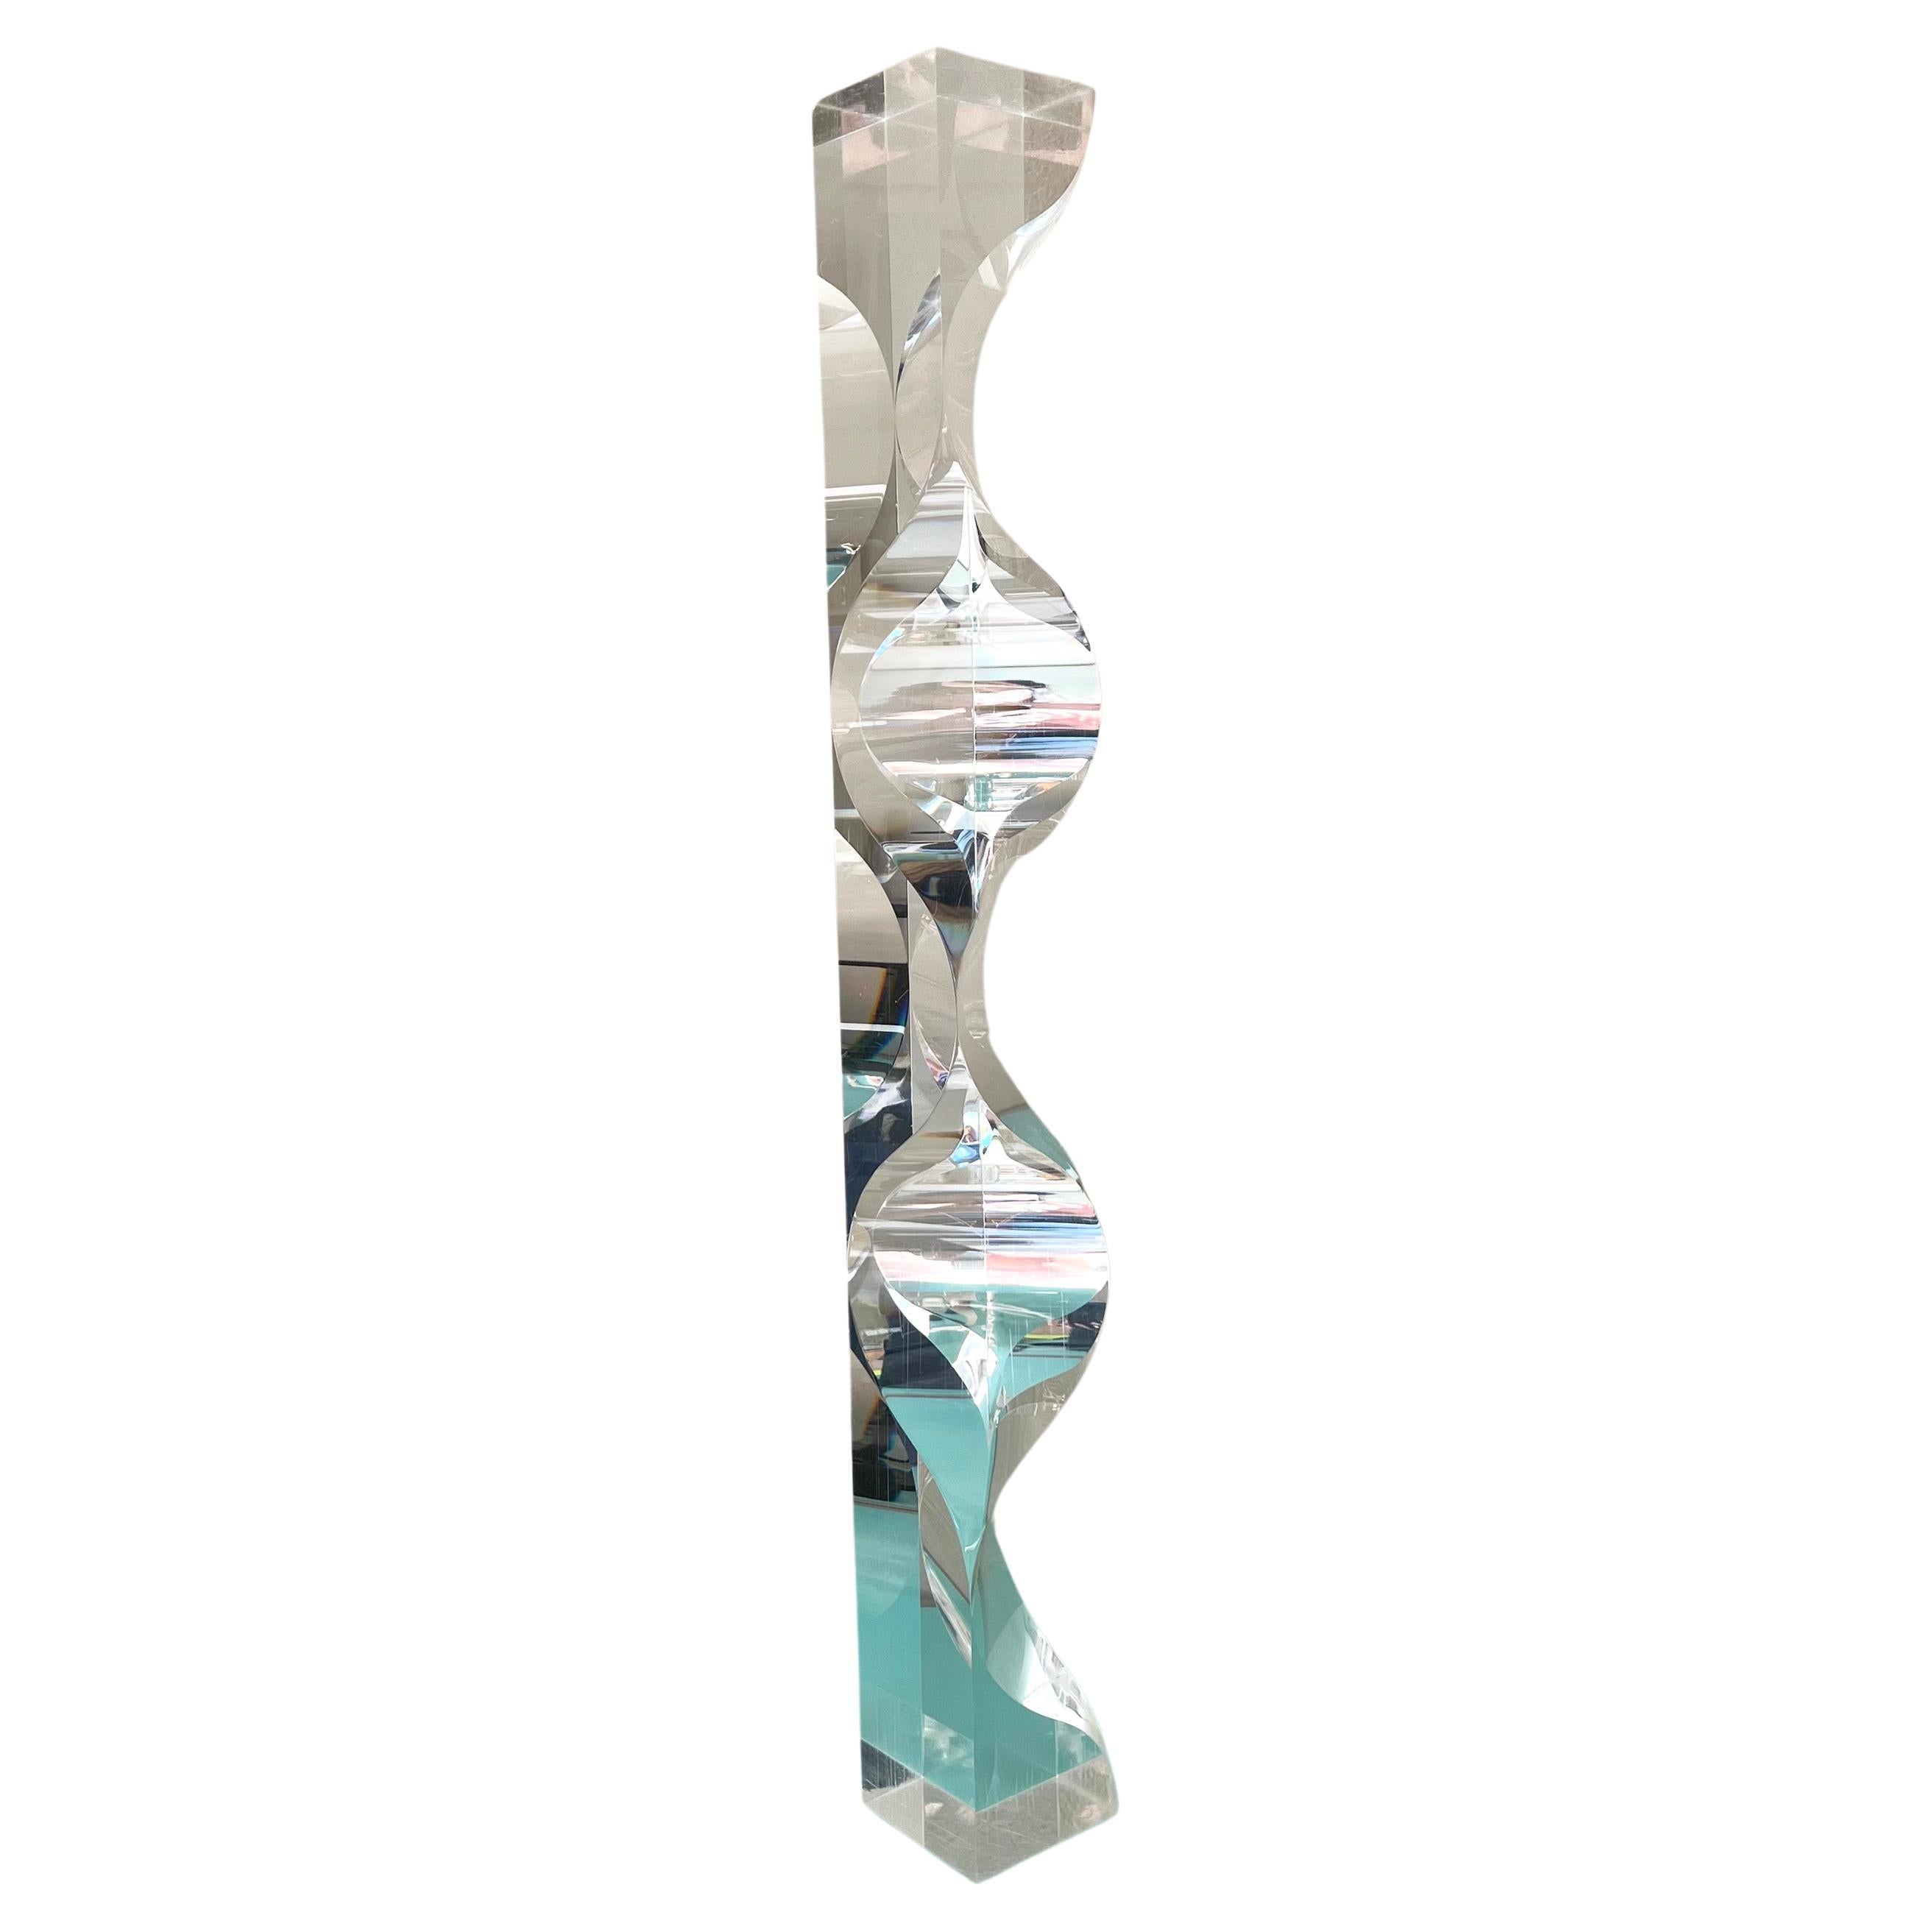 Mid-Century Modern Alessio Tasca for Fusina Acrylic Lucite Prism Tower Sculpture For Sale